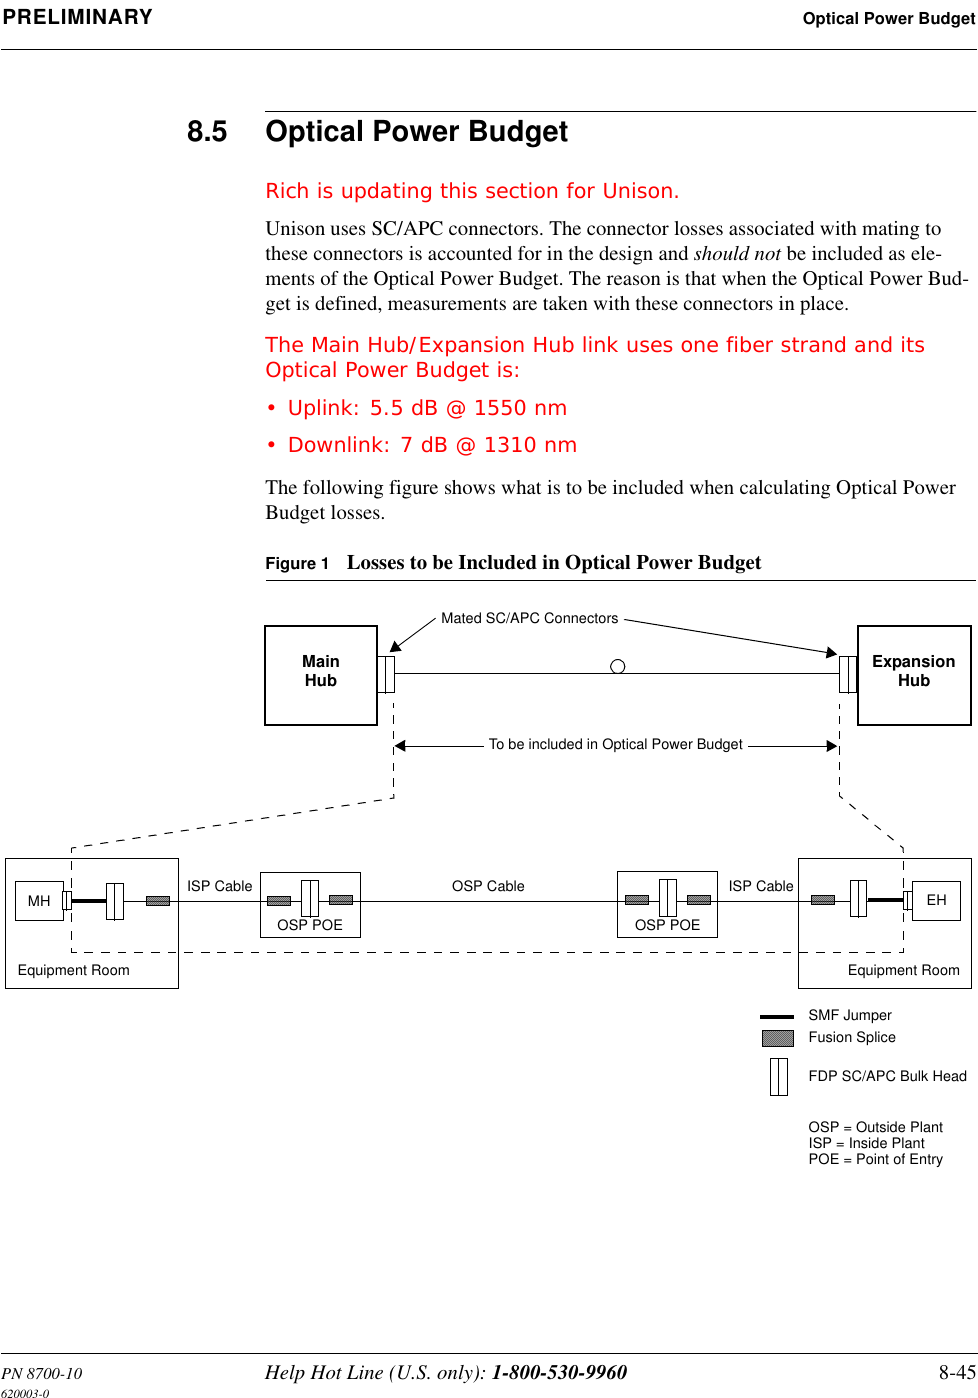 PN 8700-10 Help Hot Line (U.S. only): 1-800-530-9960 8-45620003-0PRELIMINARY Optical Power Budget8.5 Optical Power BudgetRich is updating this section for Unison.Unison uses SC/APC connectors. The connector losses associated with mating to these connectors is accounted for in the design and should not be included as ele-ments of the Optical Power Budget. The reason is that when the Optical Power Bud-get is defined, measurements are taken with these connectors in place.The Main Hub/Expansion Hub link uses one fiber strand and its Optical Power Budget is:• Uplink: 5.5 dB @ 1550 nm• Downlink: 7 dB @ 1310 nmThe following figure shows what is to be included when calculating Optical Power Budget losses.Figure 1 Losses to be Included in Optical Power BudgetMainHub ExpansionHubMated SC/APC ConnectorsTo be included in Optical Power BudgetMH EHEquipment RoomOSP POEEquipment RoomISP Cable ISP CableOSP CableSMF JumperFDP SC/APC Bulk HeadFusion SpliceOSP POEOSP = Outside PlantISP = Inside PlantPOE = Point of Entry